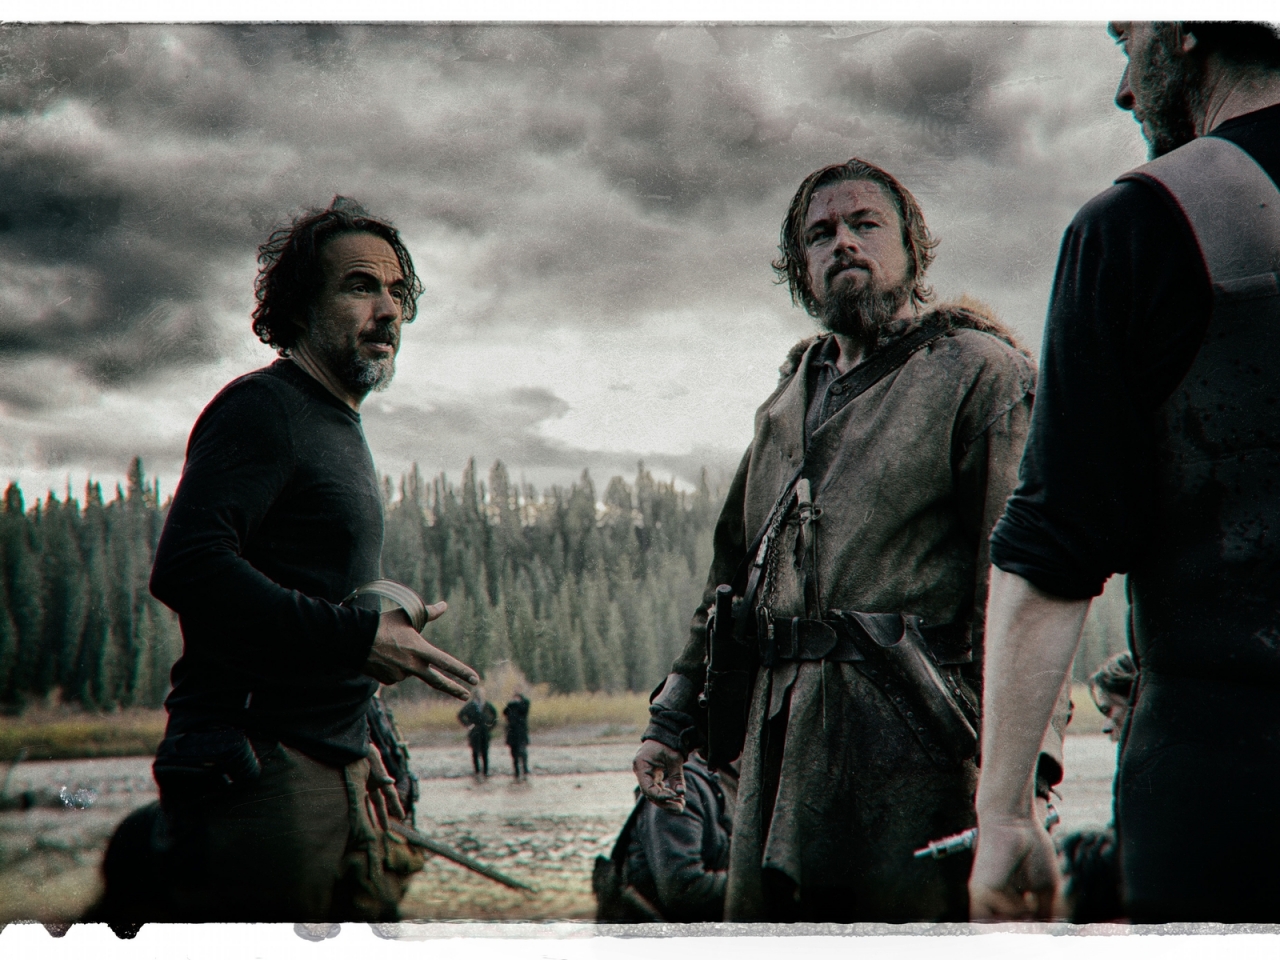 The Revenant Cast for 1280 x 960 resolution